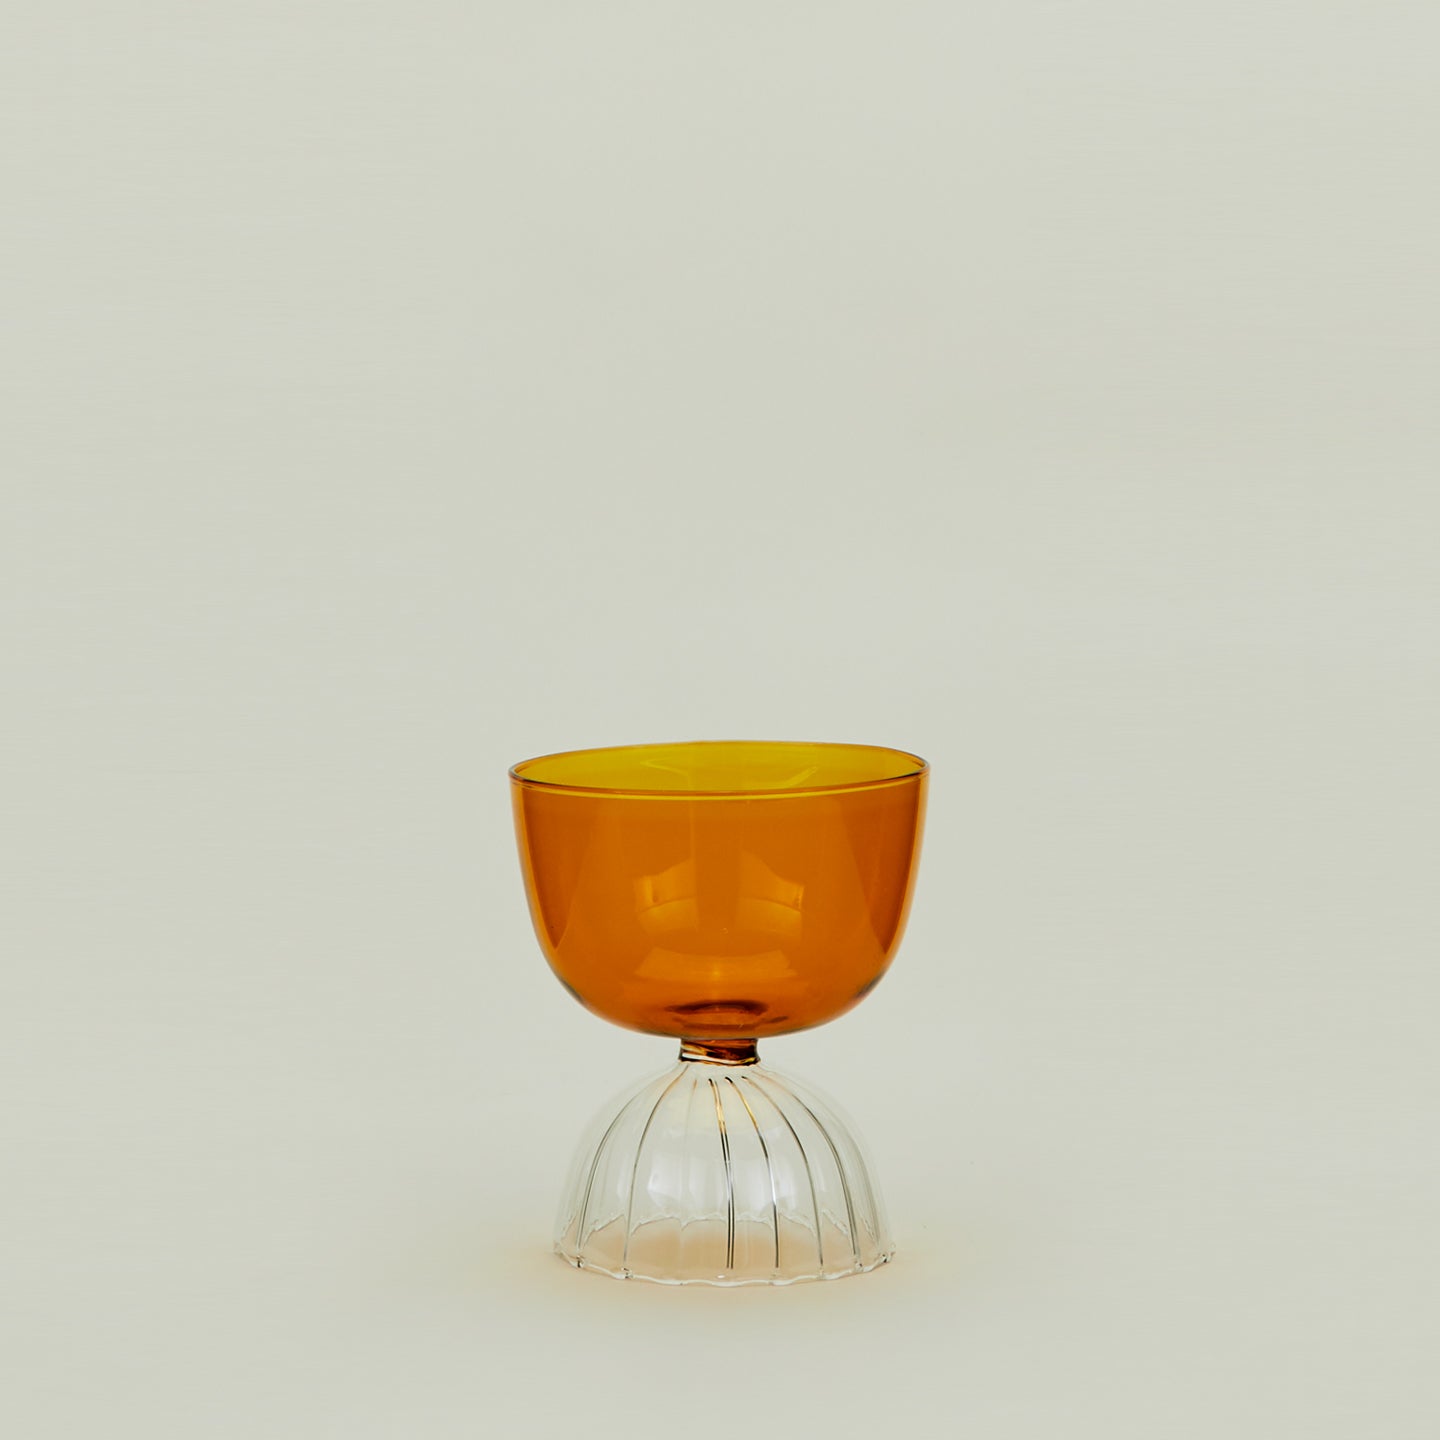 Drinking glass with clear stem and amber cup, filled with ice water.